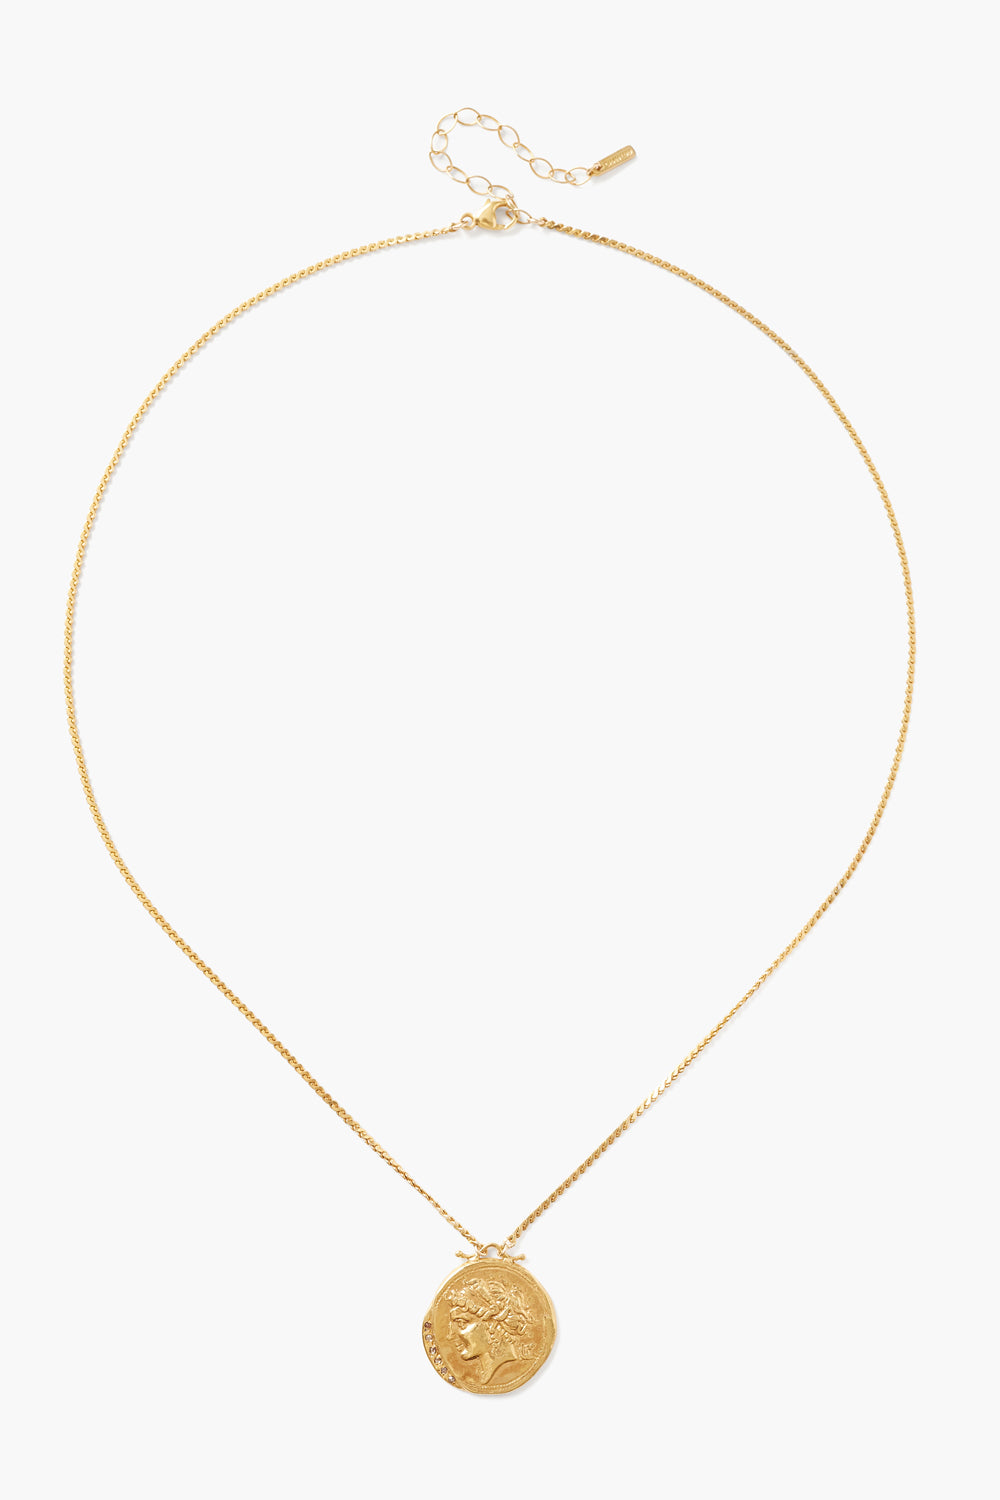 YELLOW GOLD ADJUSTABLE CHAMPANGE DIAMOND NECKLACE - Kingfisher Road - Online Boutique